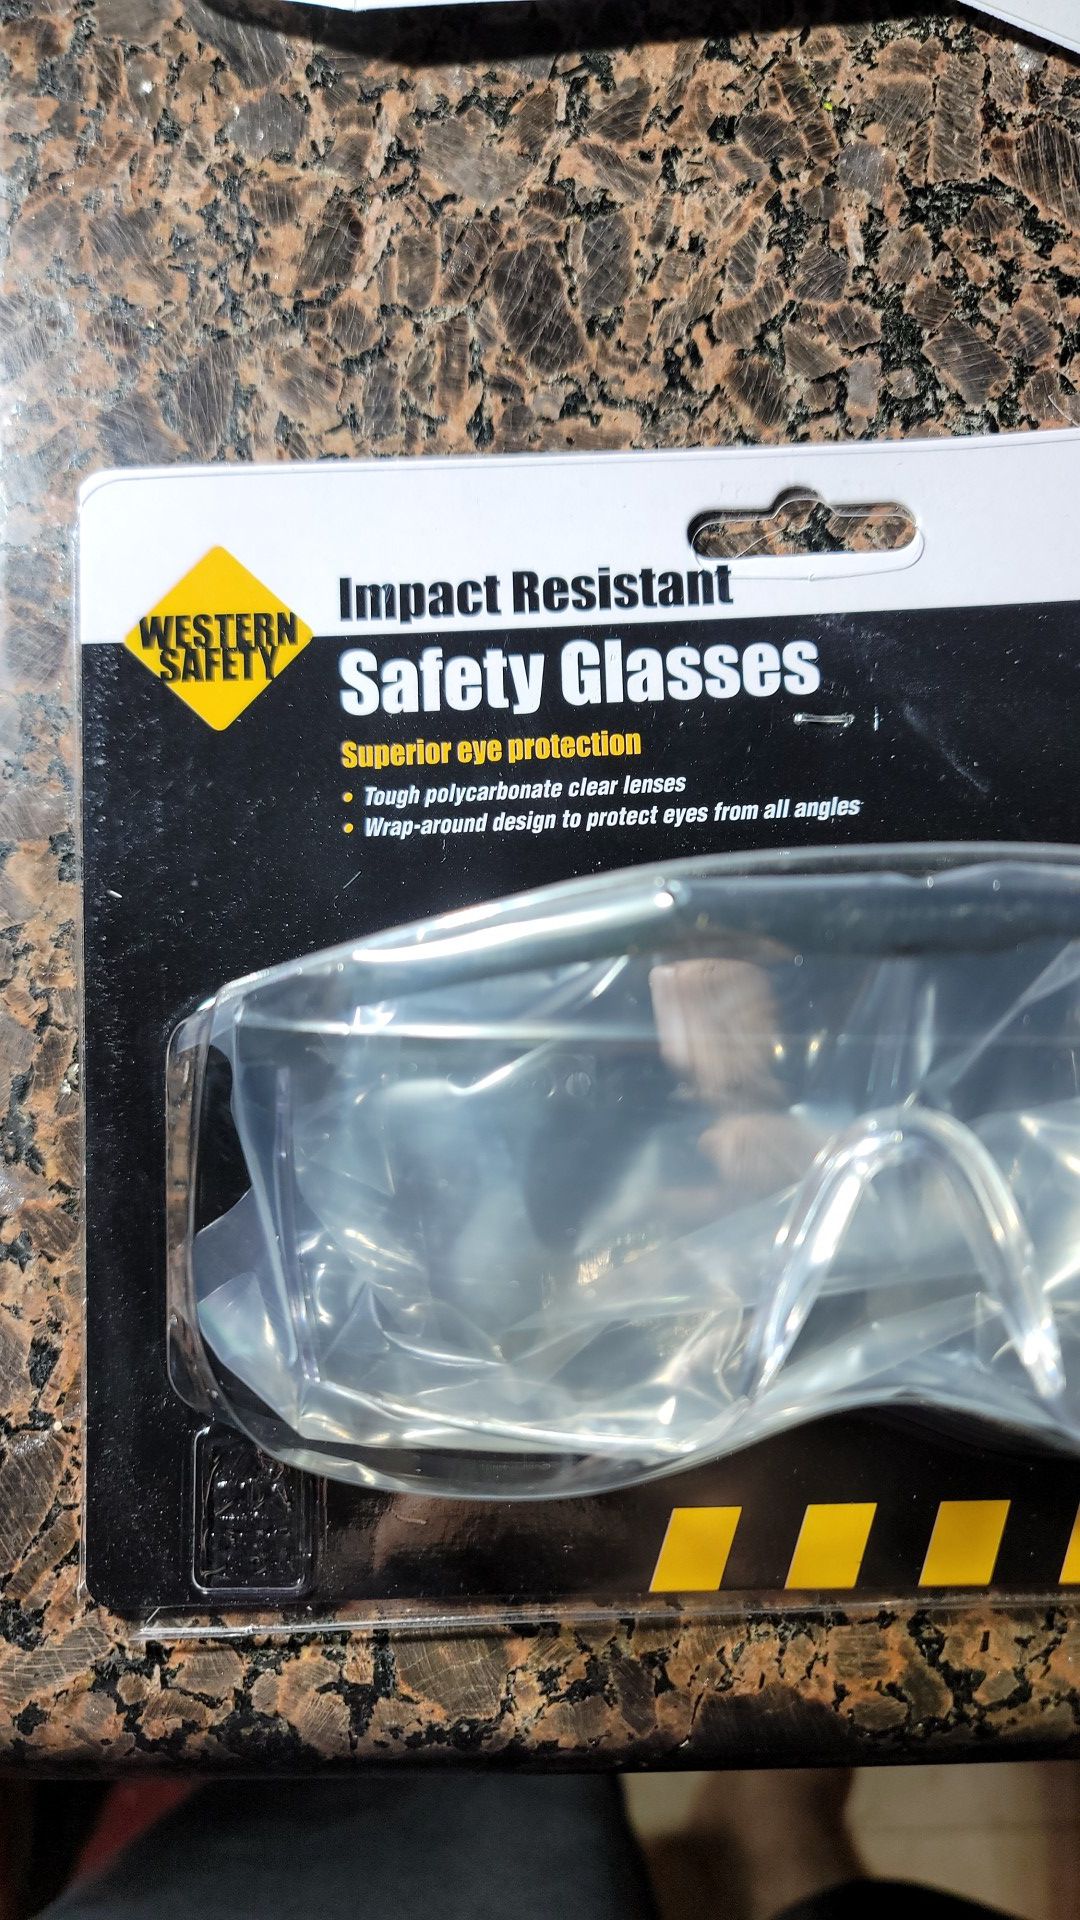 Western Safety Impact Resistant Safety Glasses Superior Eye Protection 1 size fits all